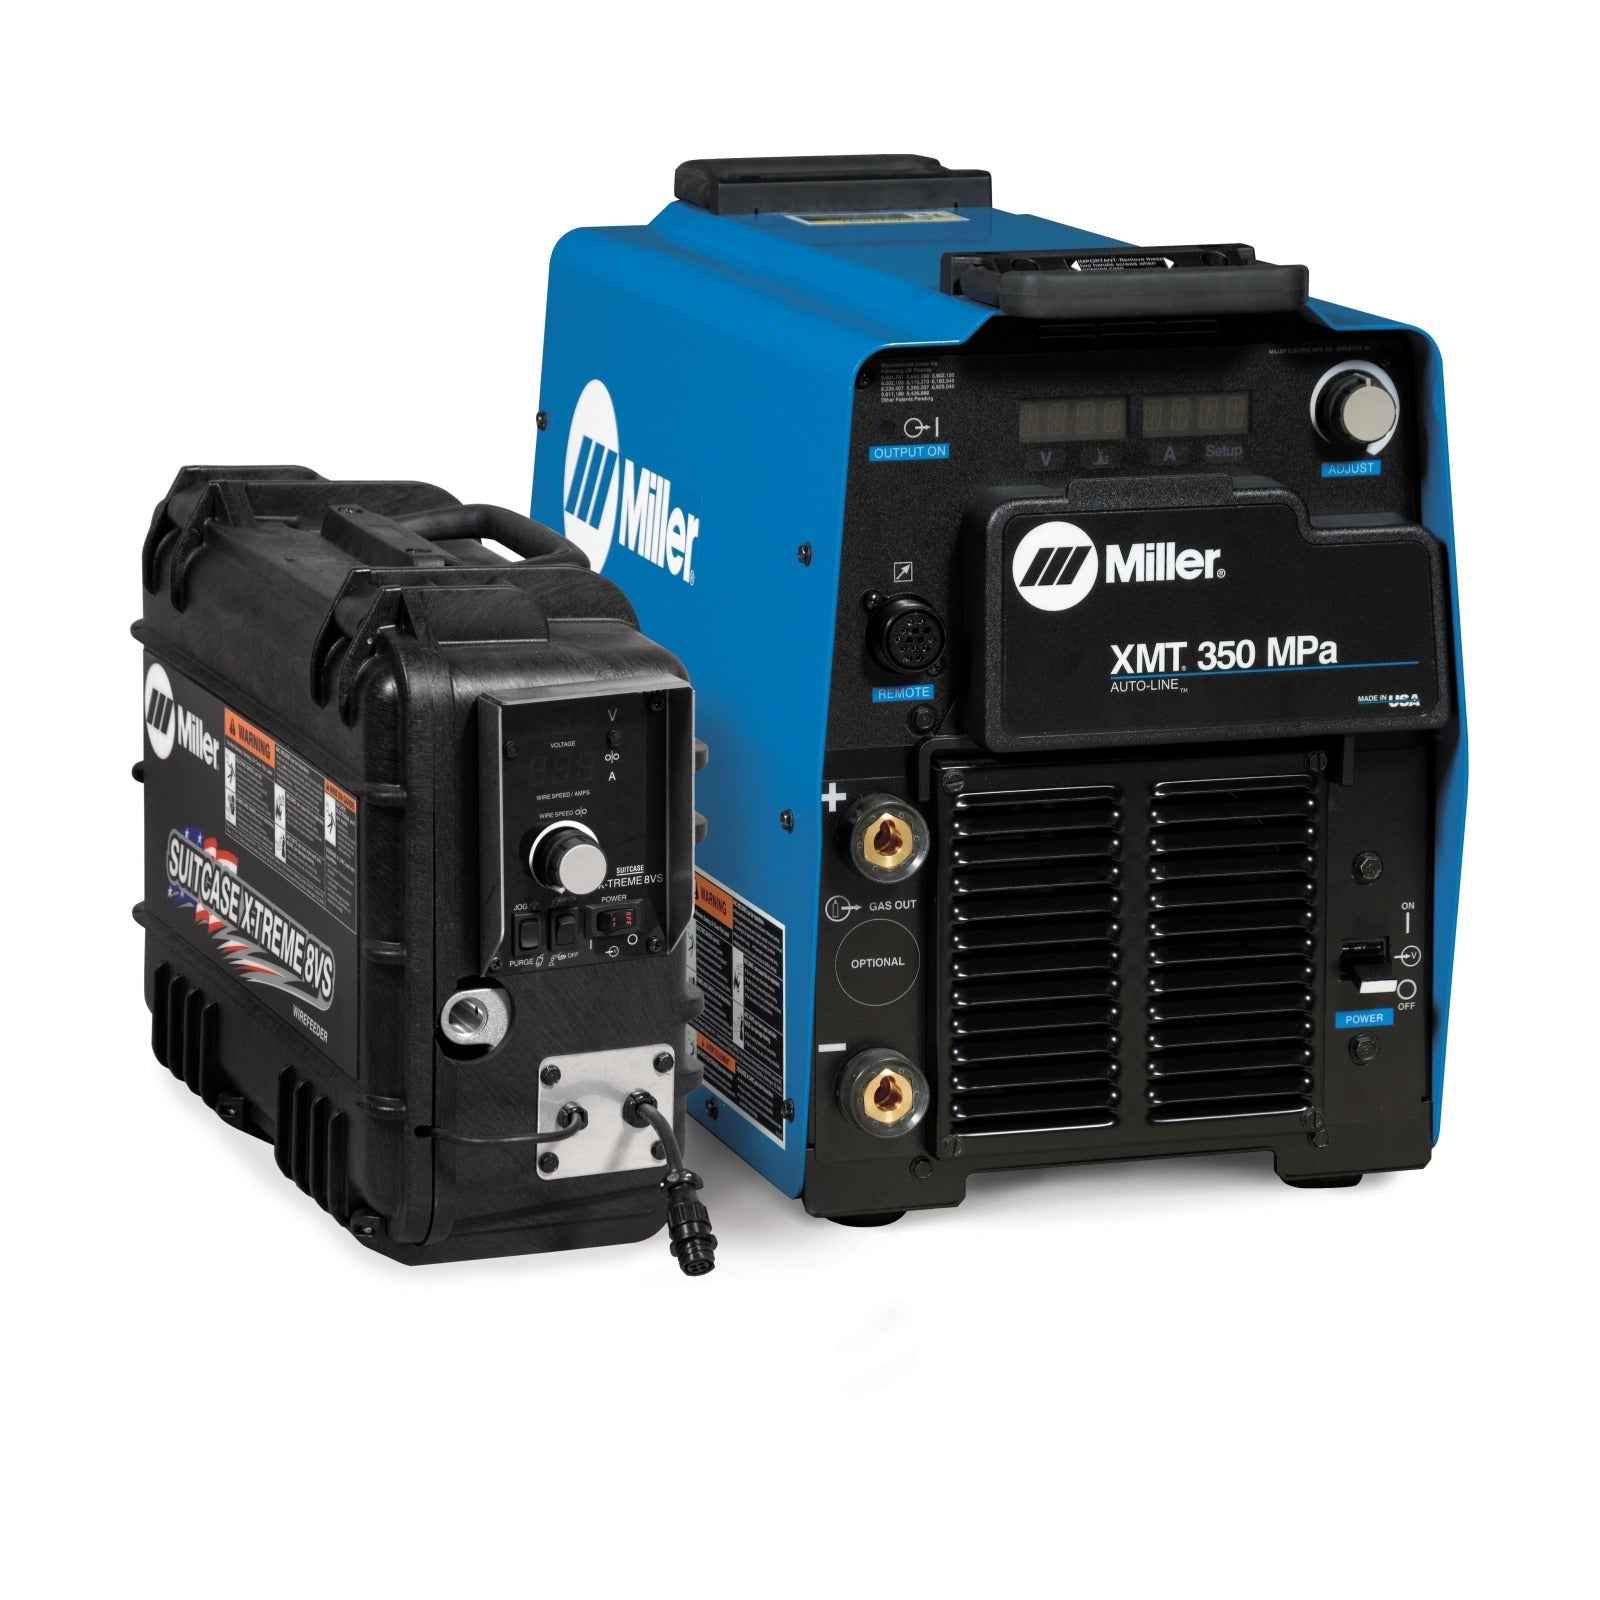 Miller XMT 350 MPa Multiprocess Welder with SuitCase X-Treme 8VS (951308)